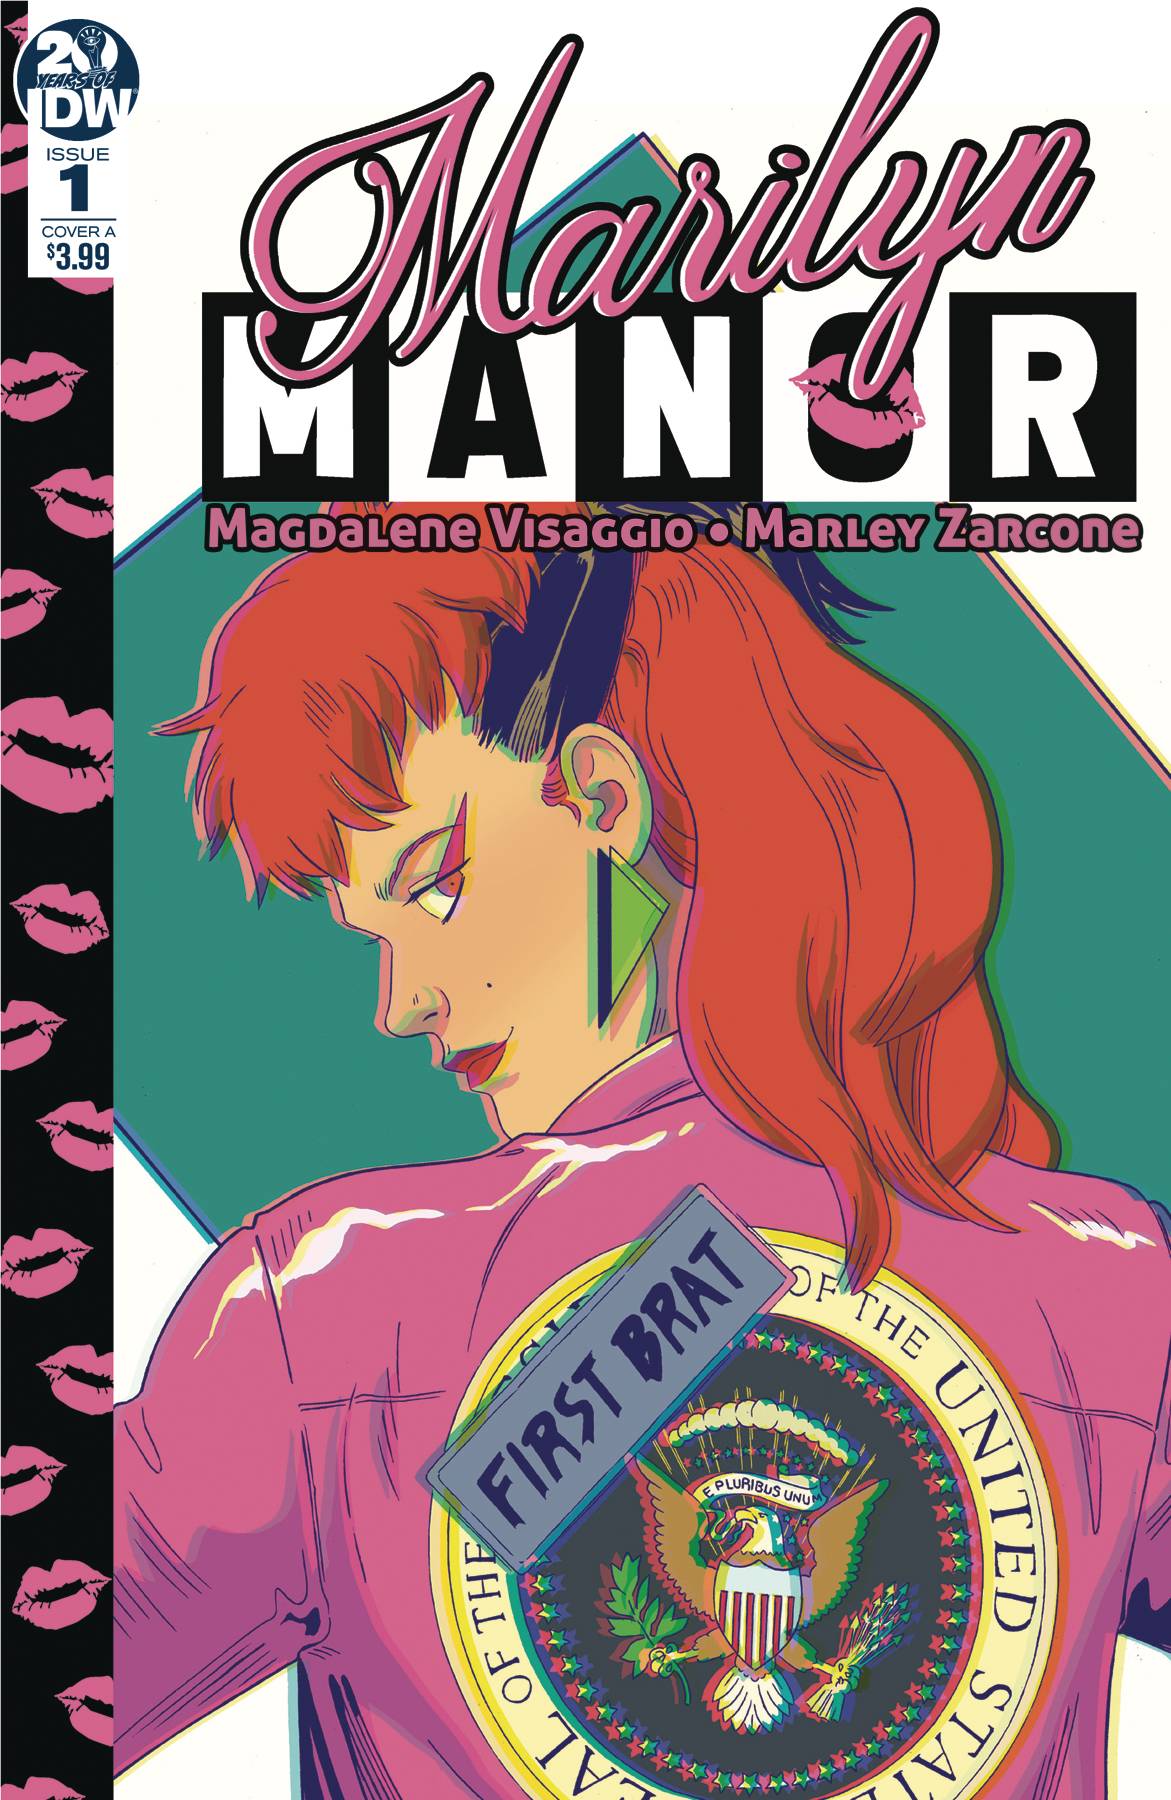 Marilyn Manor #1 Cover A Zarcone